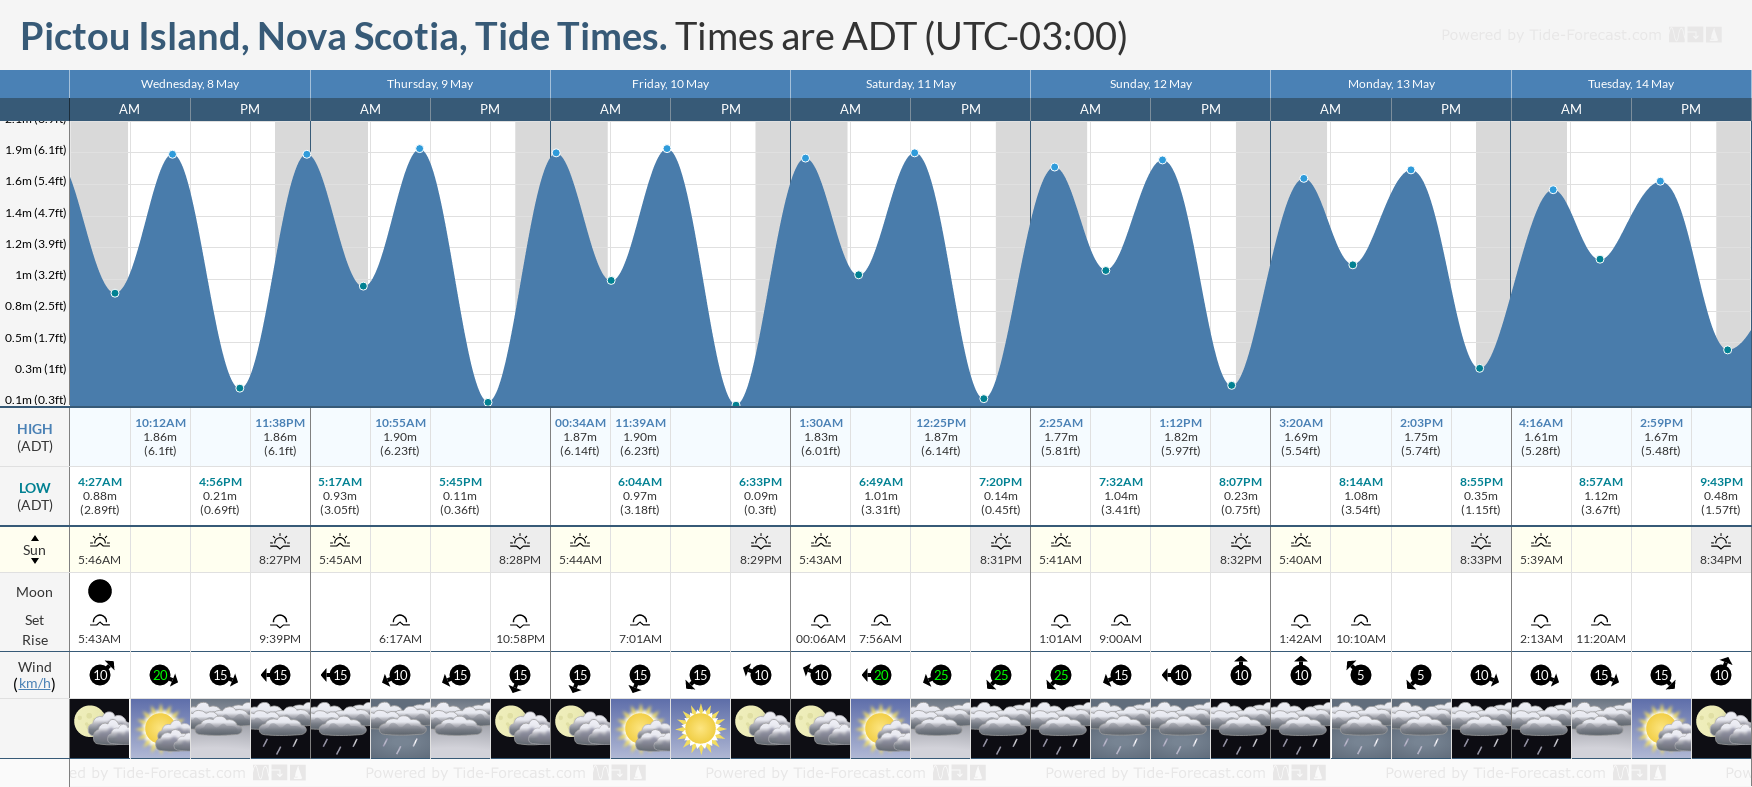 Pictou Island, Nova Scotia Tide Chart including high and low tide tide times for the next 7 days